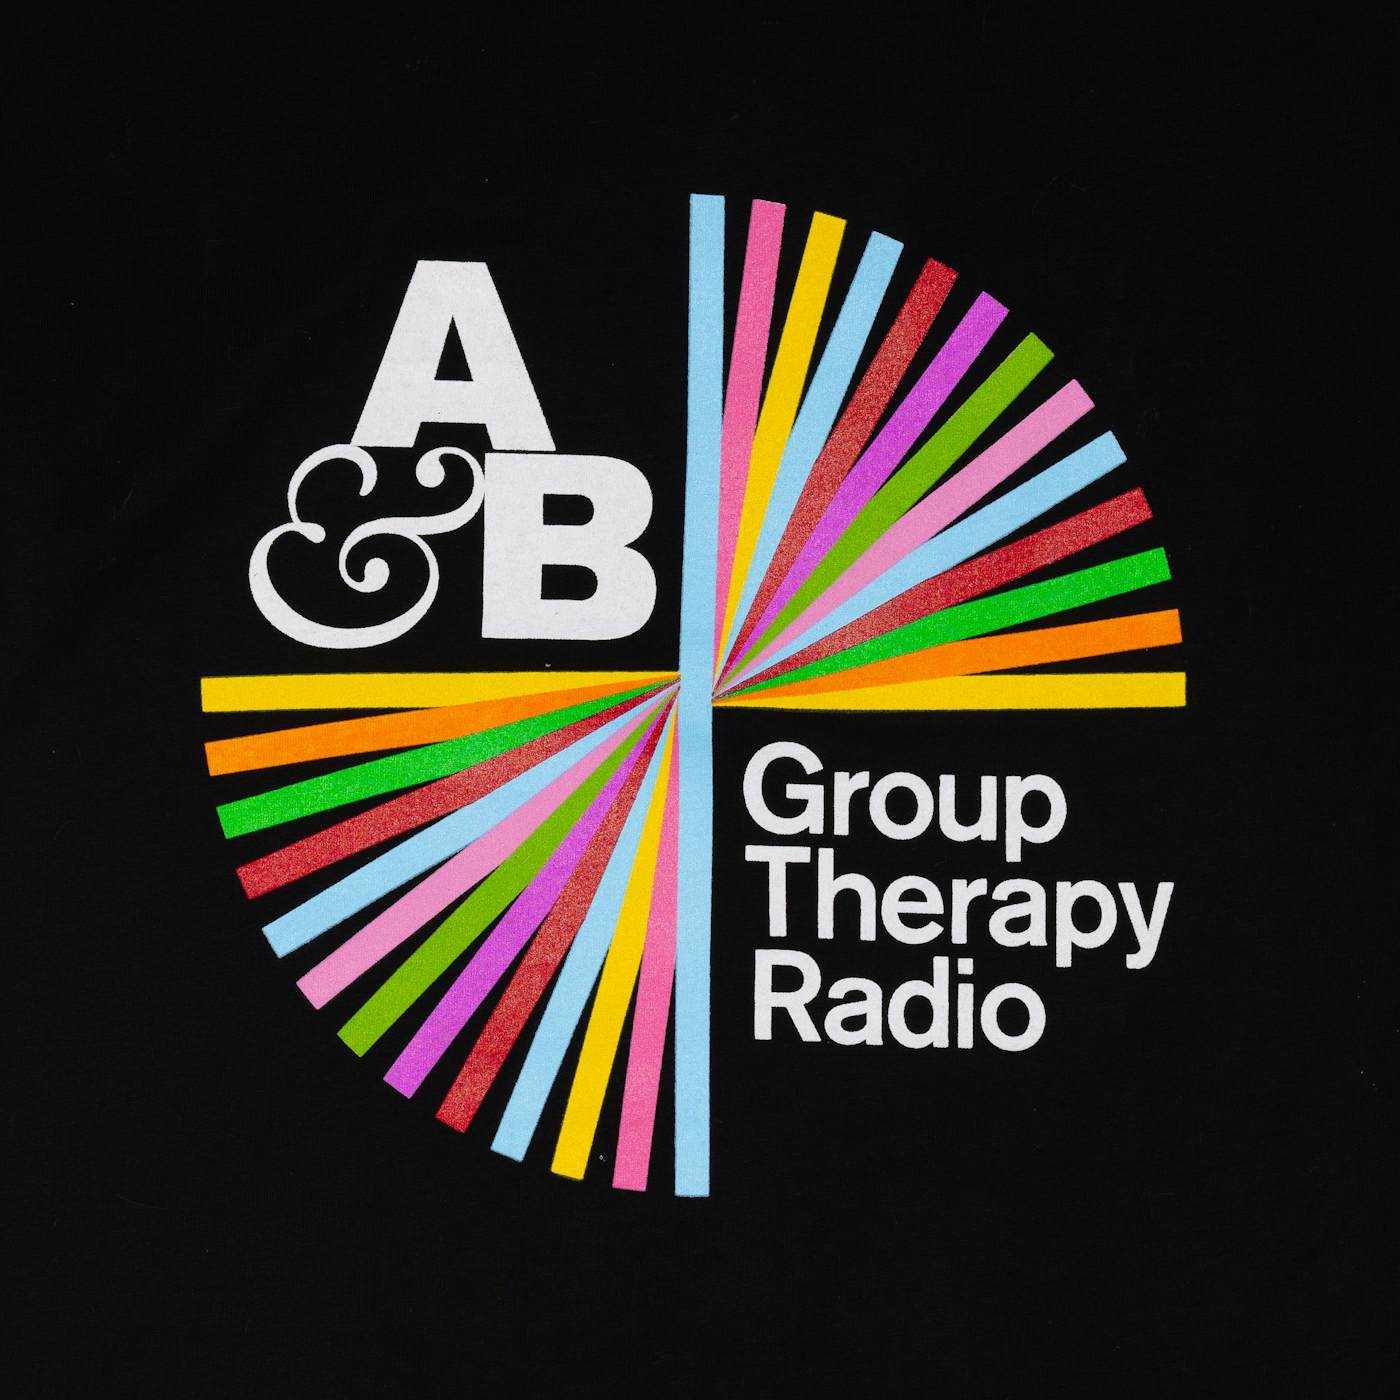 Above & Beyond Group Therapy Radio Women's Tee